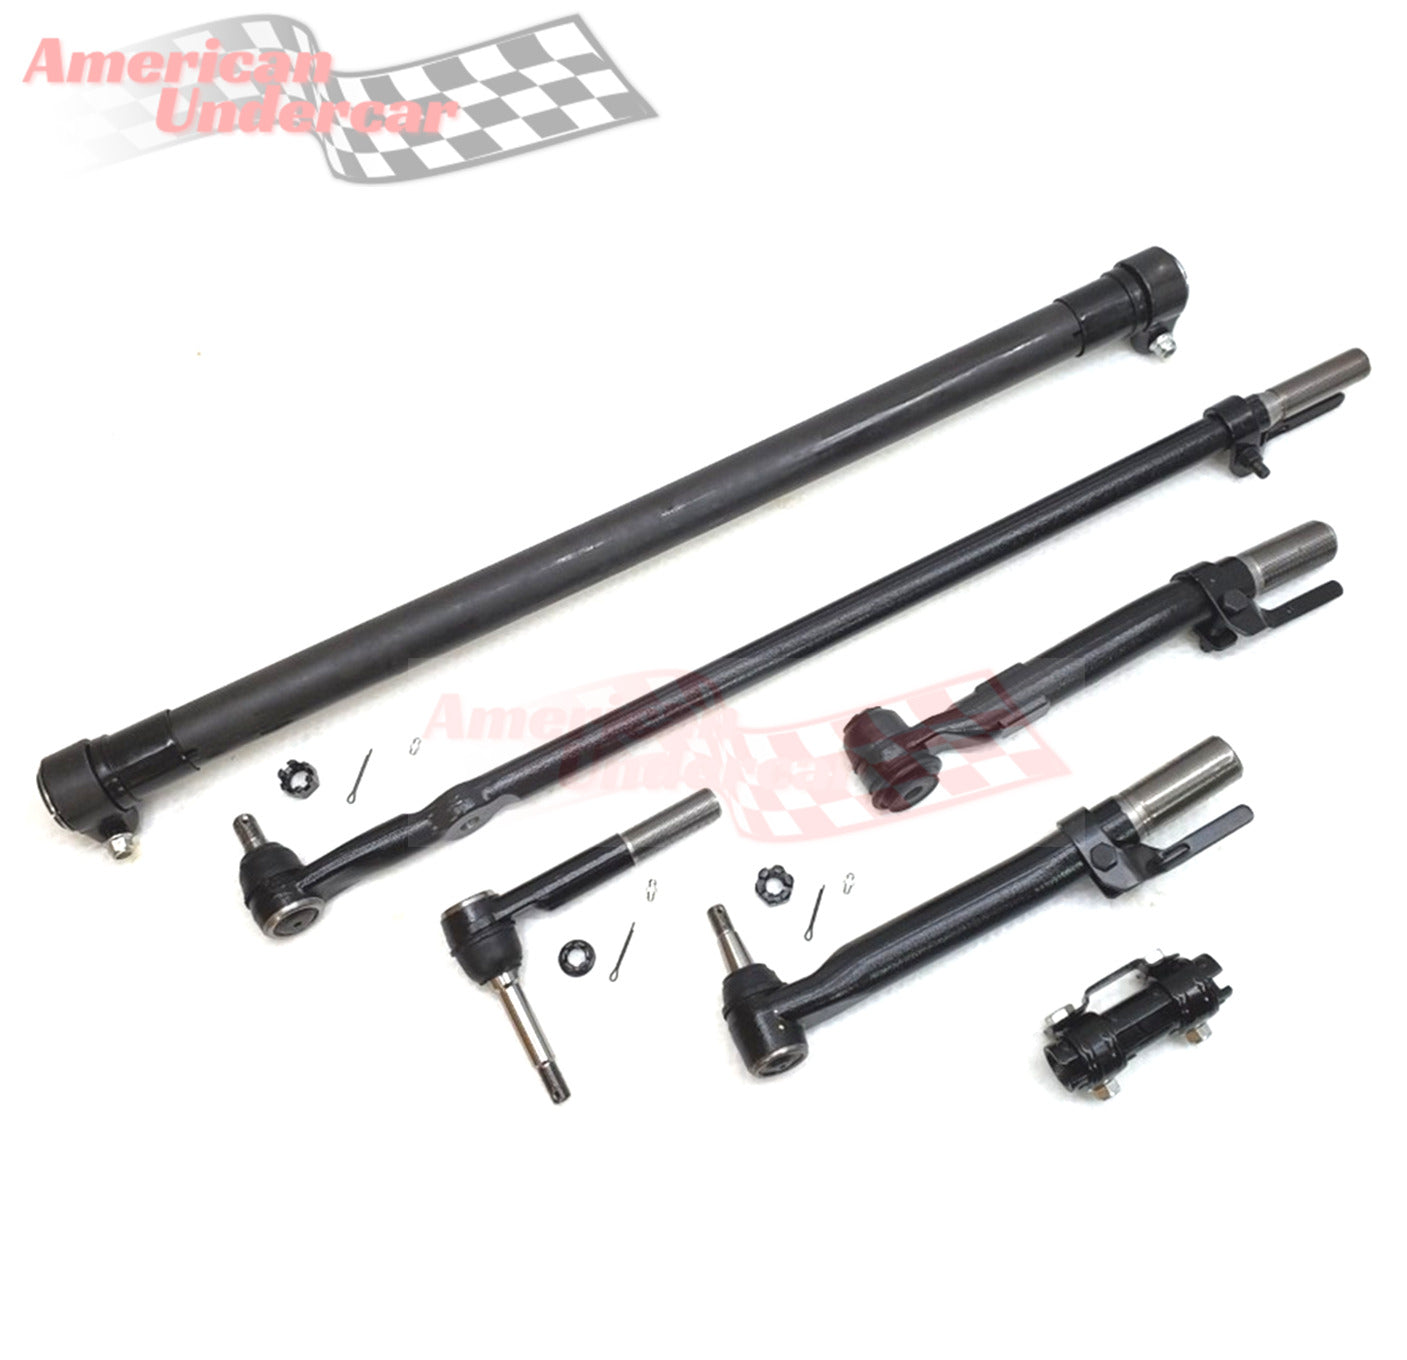 XRF Ford F350 Super Duty Tie Rod Steering and Suspension Kit 2011 - 2016 4x4